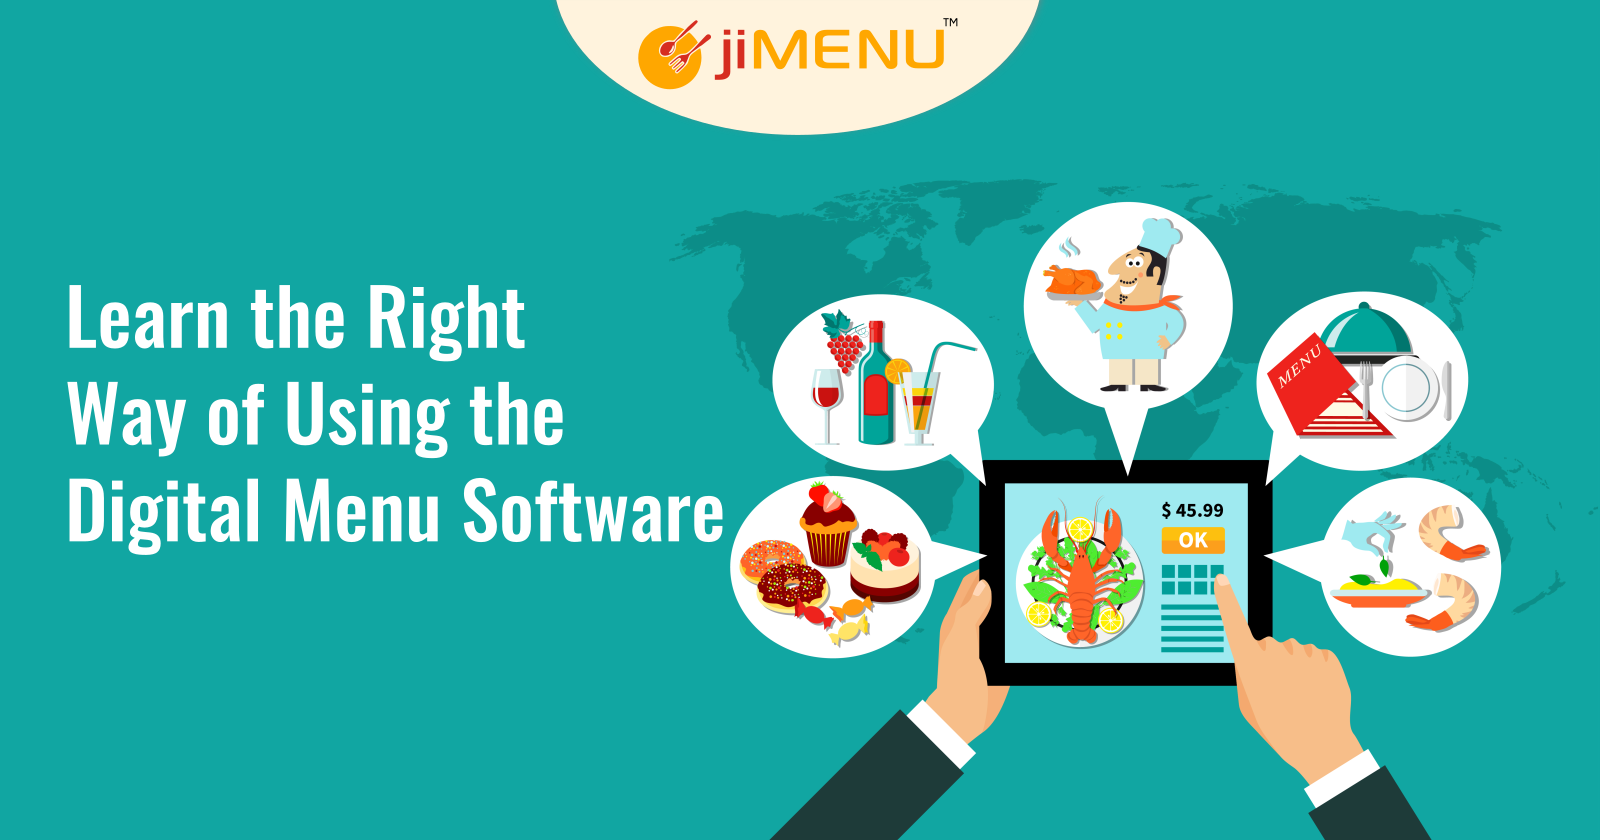 Learn the Right Way of Using the Digital Menu Software